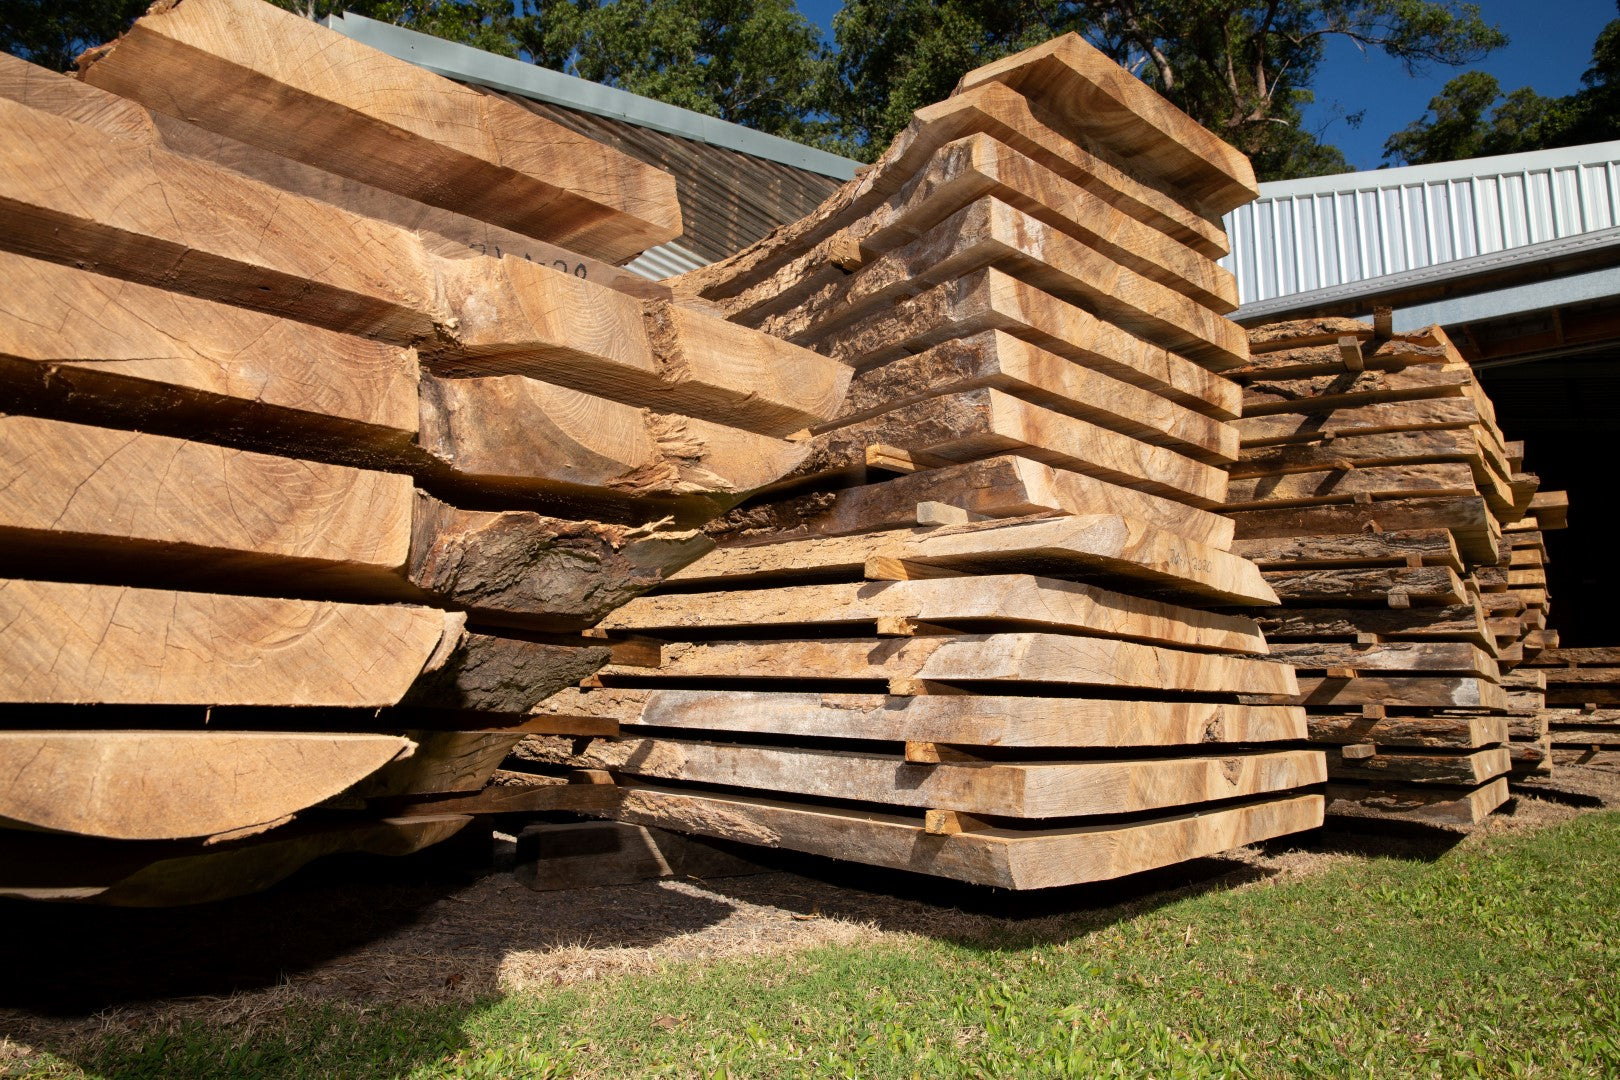 Is Your Wood Ready To Work?